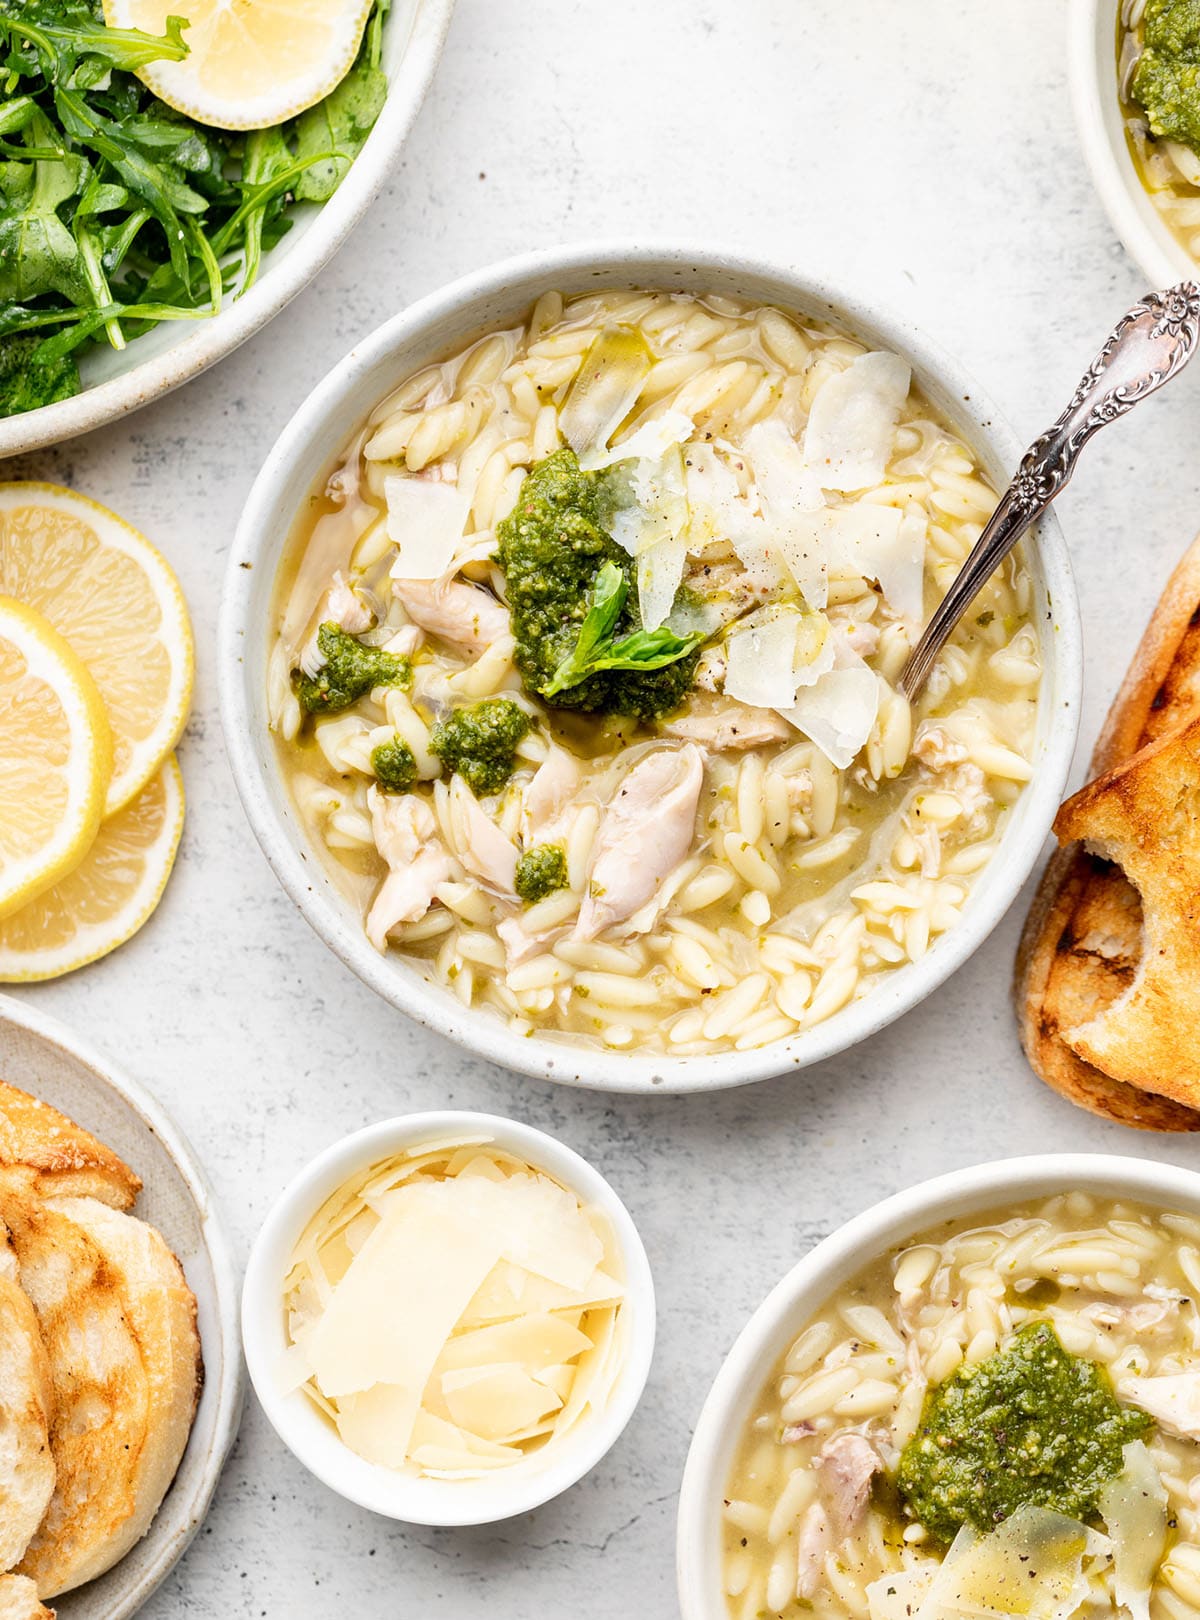 Chicken orzo soup in a white bowl, topped with a scoop of pesto.